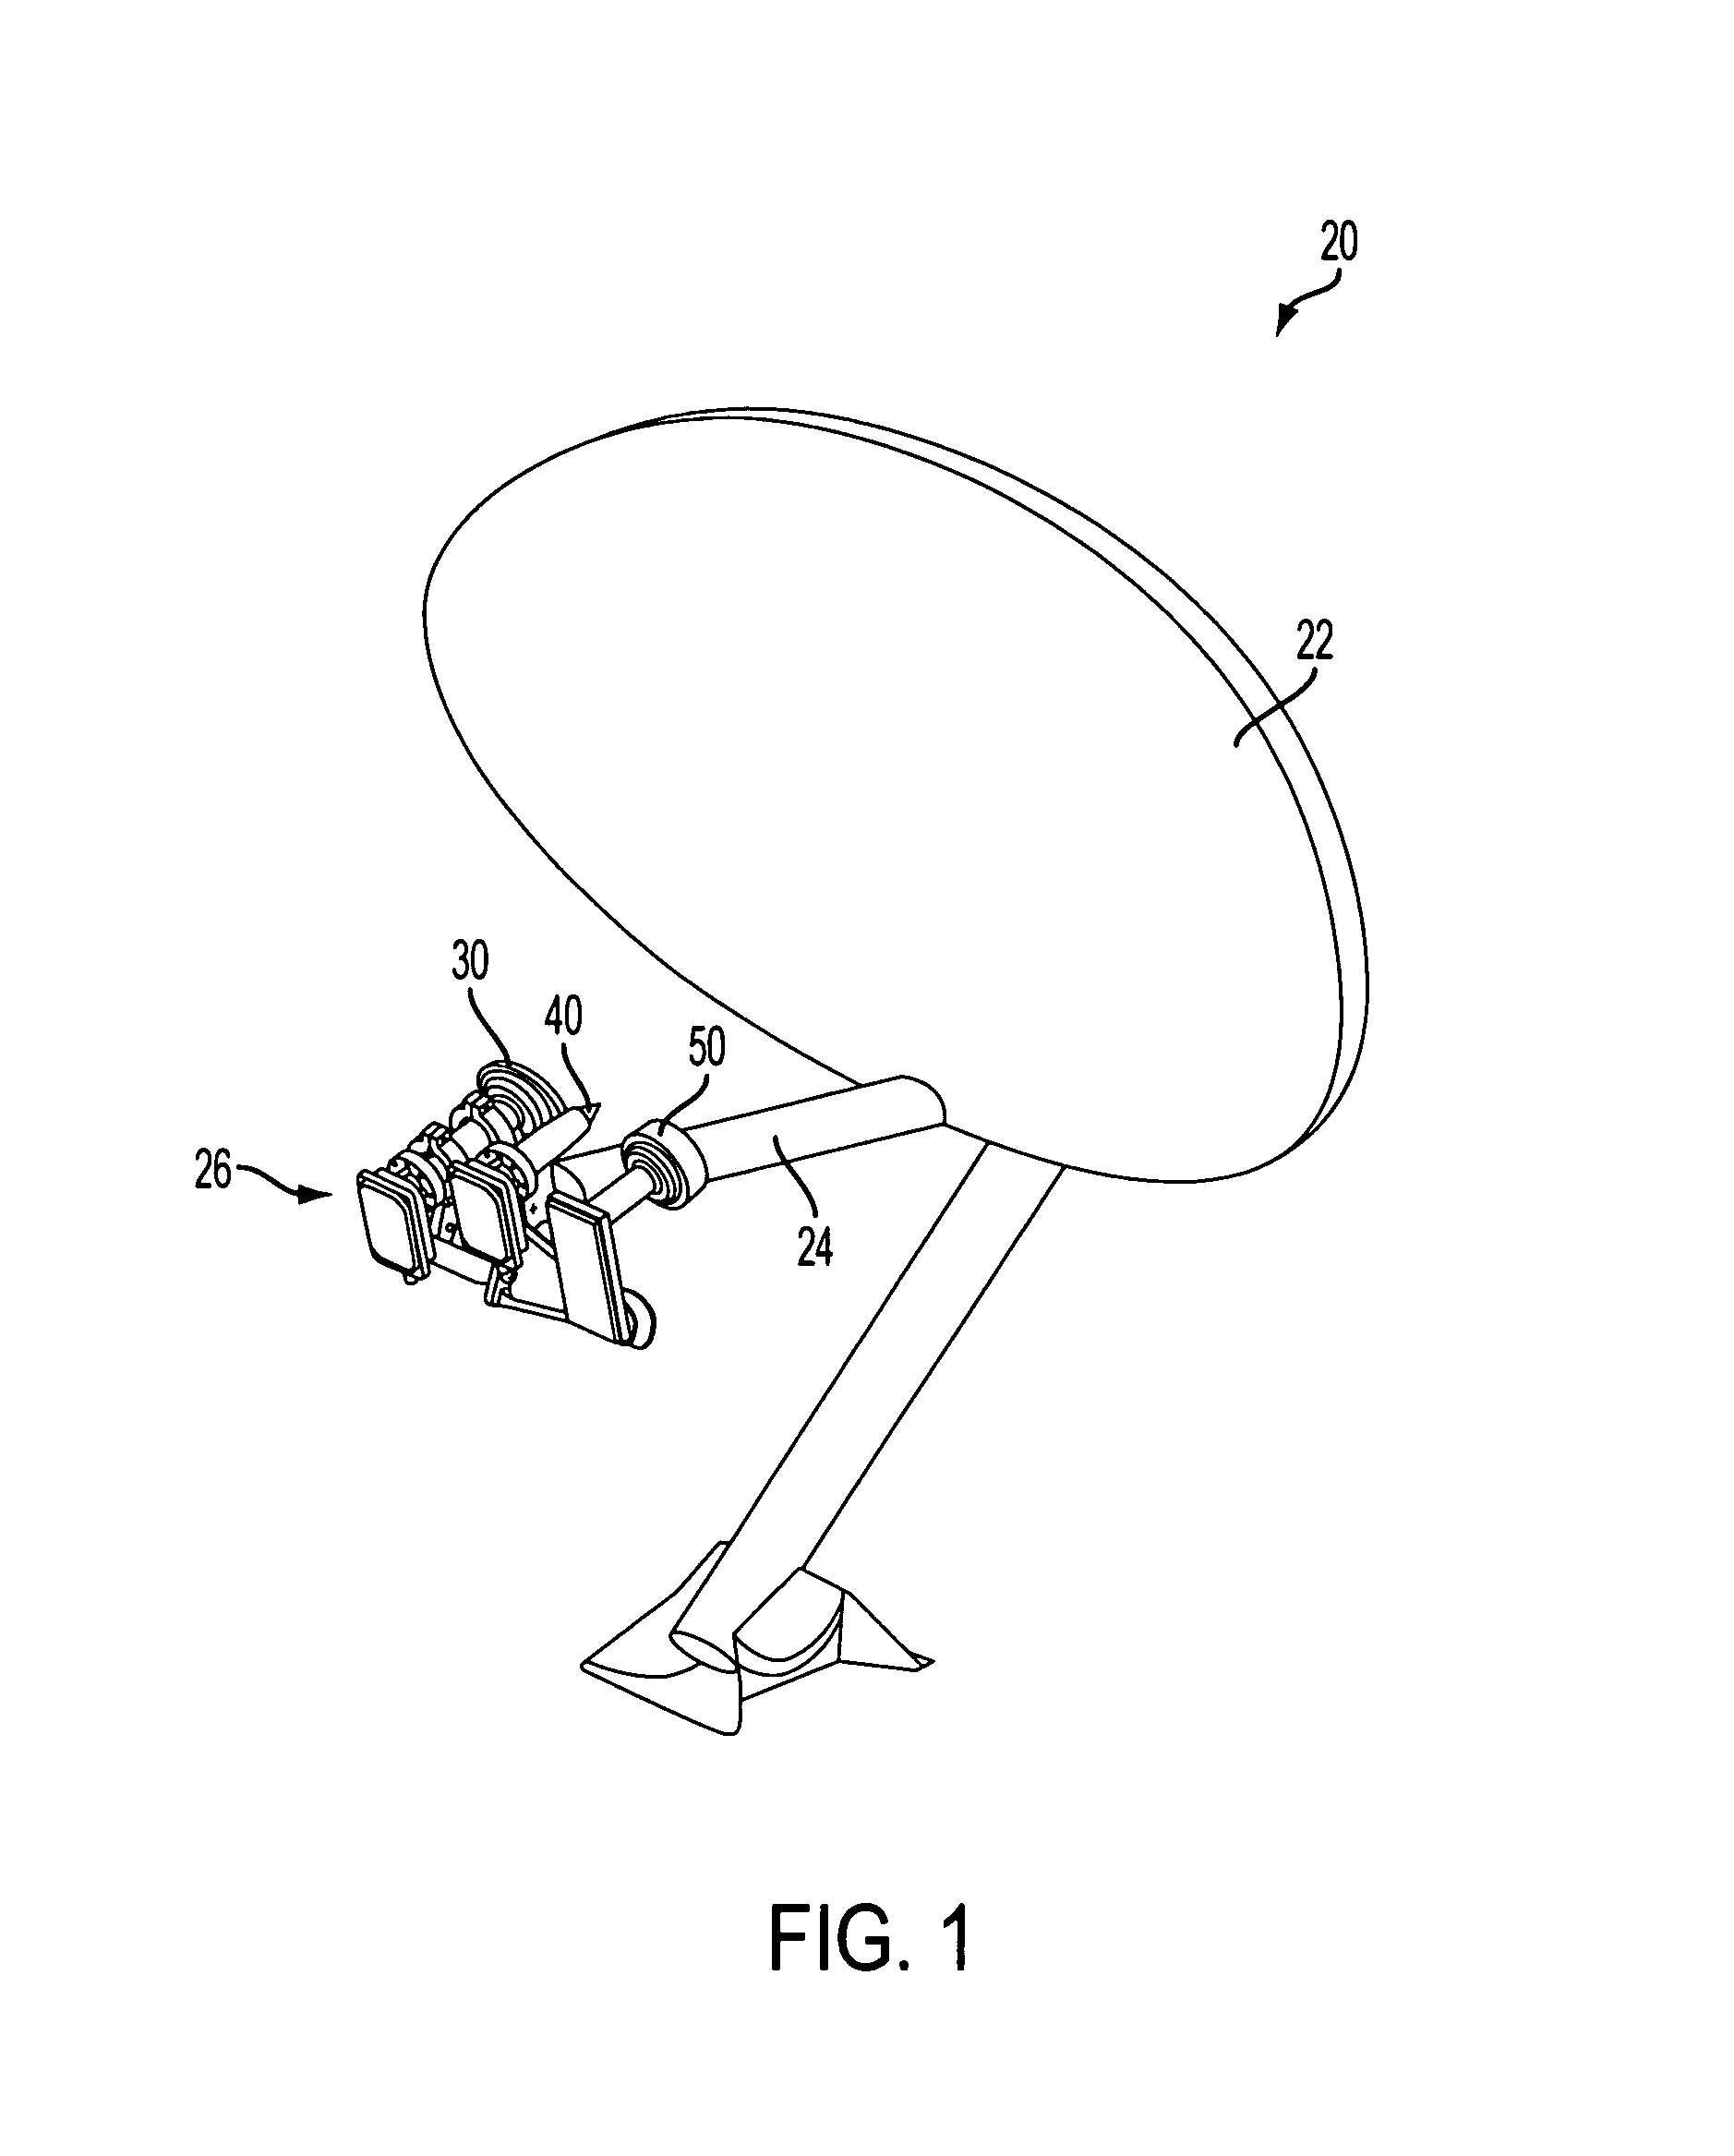 Feed assembly for multi-beam antenna with non-circular reflector, and such an assembly that is field-switchable between linear and circular polarization modes